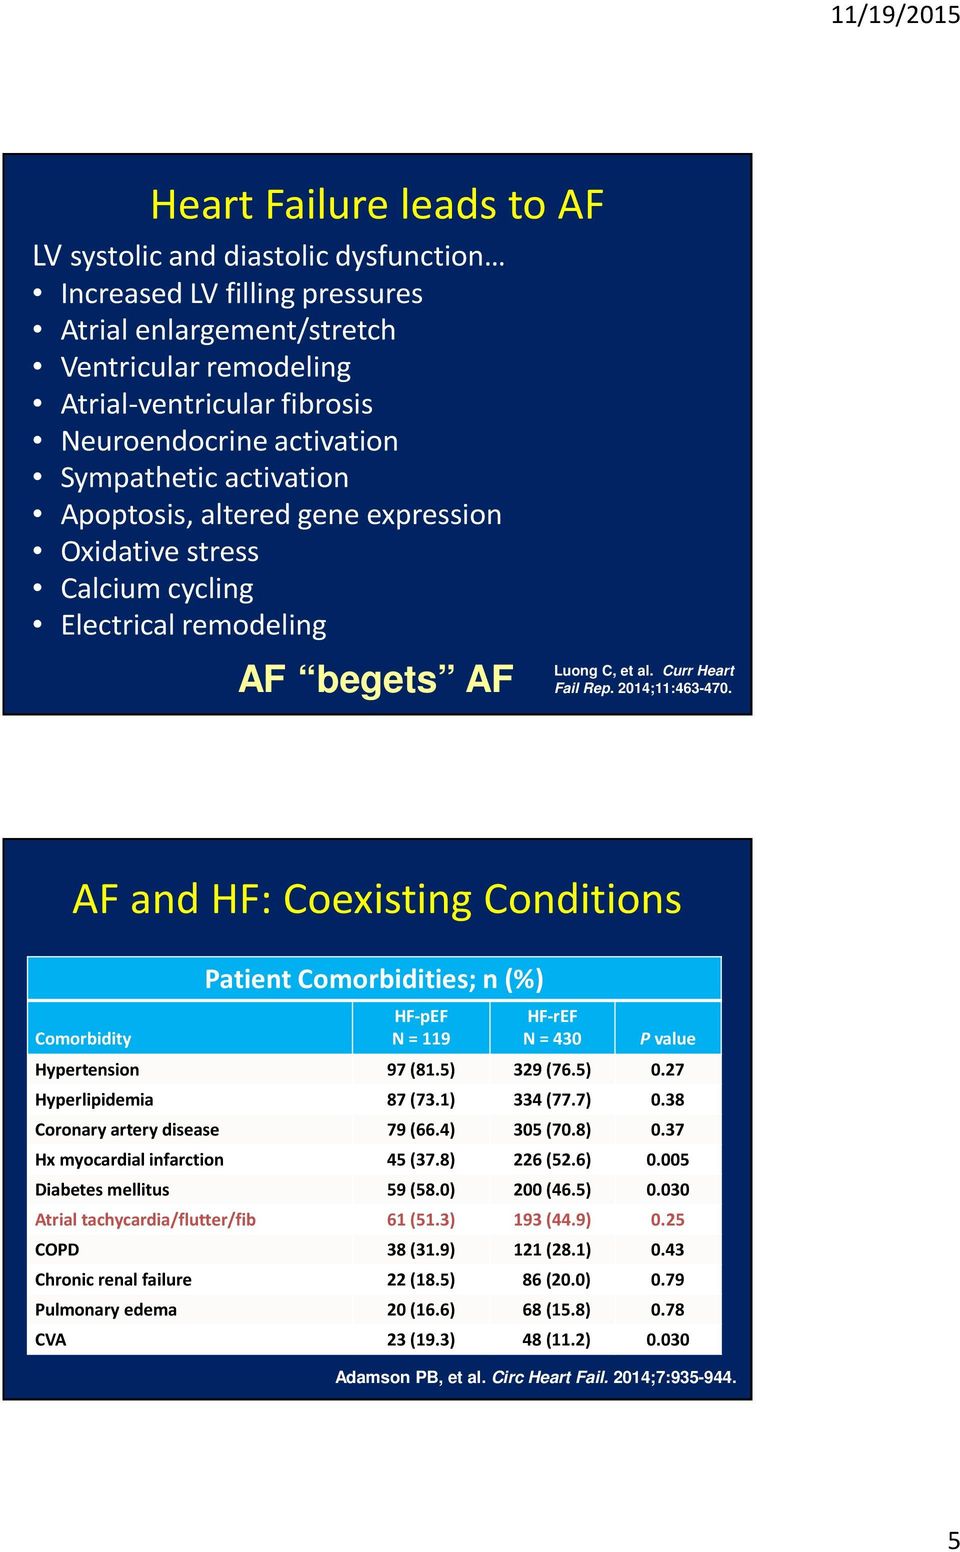 AF and HF: Coexisting Conditions Comorbidity Patient Comorbidities; n (%) HF-pEF N = 119 HF-rEF N = 430 P value Hypertension 97 (81.5) 329 (76.5) 0.27 Hyperlipidemia 87 (73.1) 334 (77.7) 0.